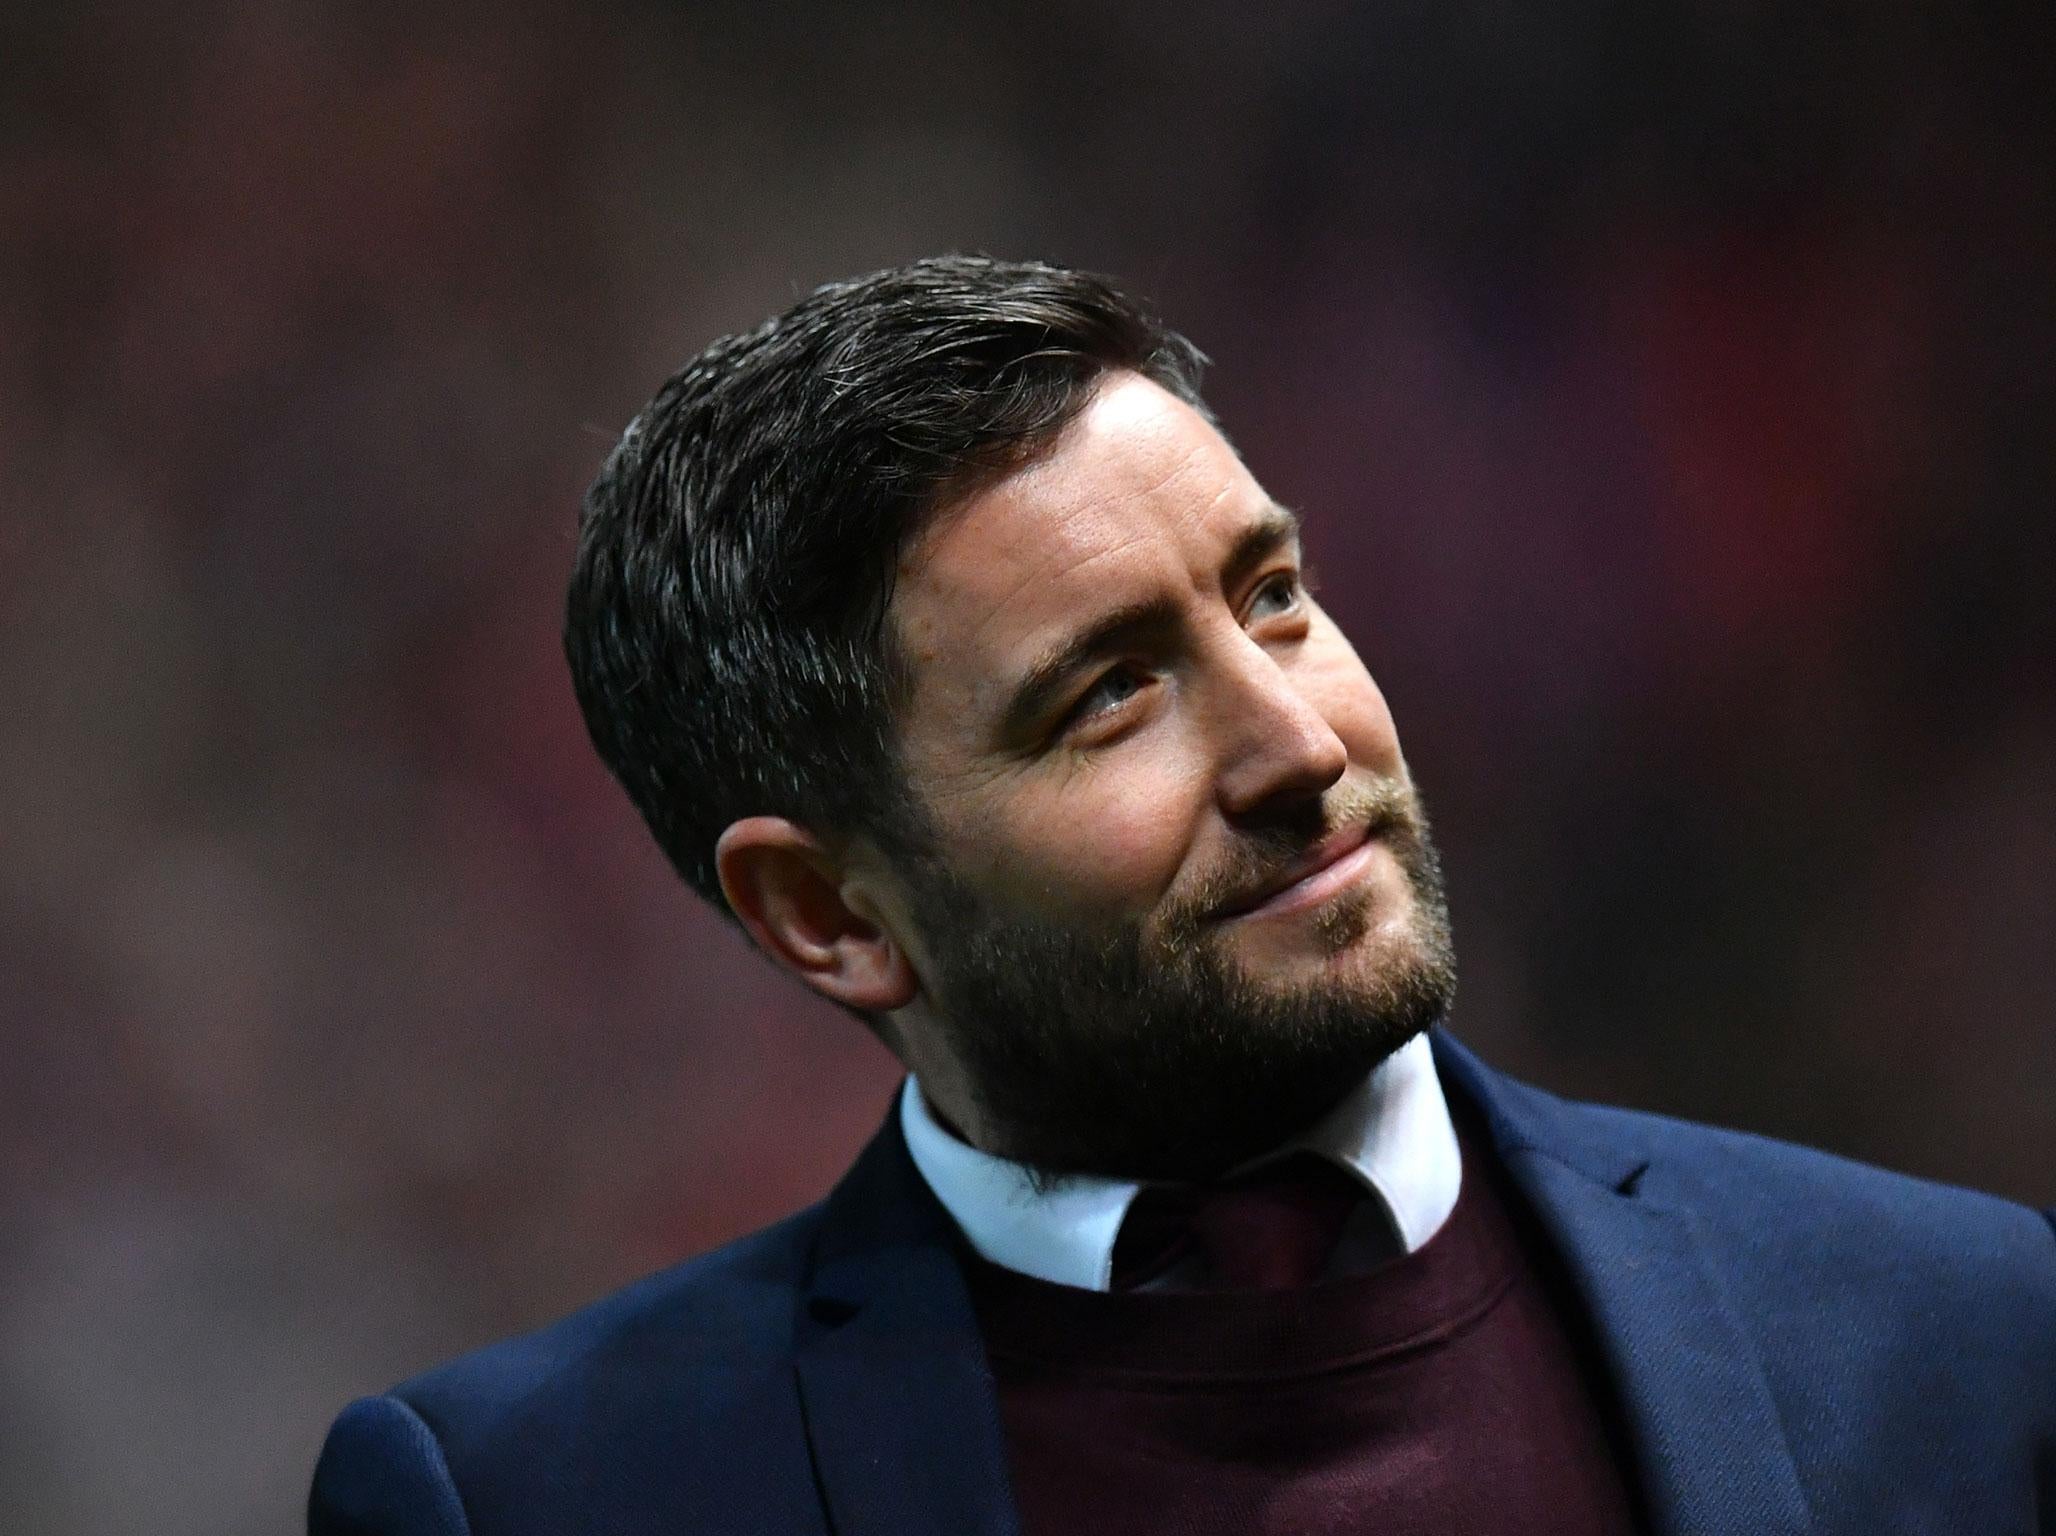 Lee Johnson is excited to test himself against Pep Guardiola